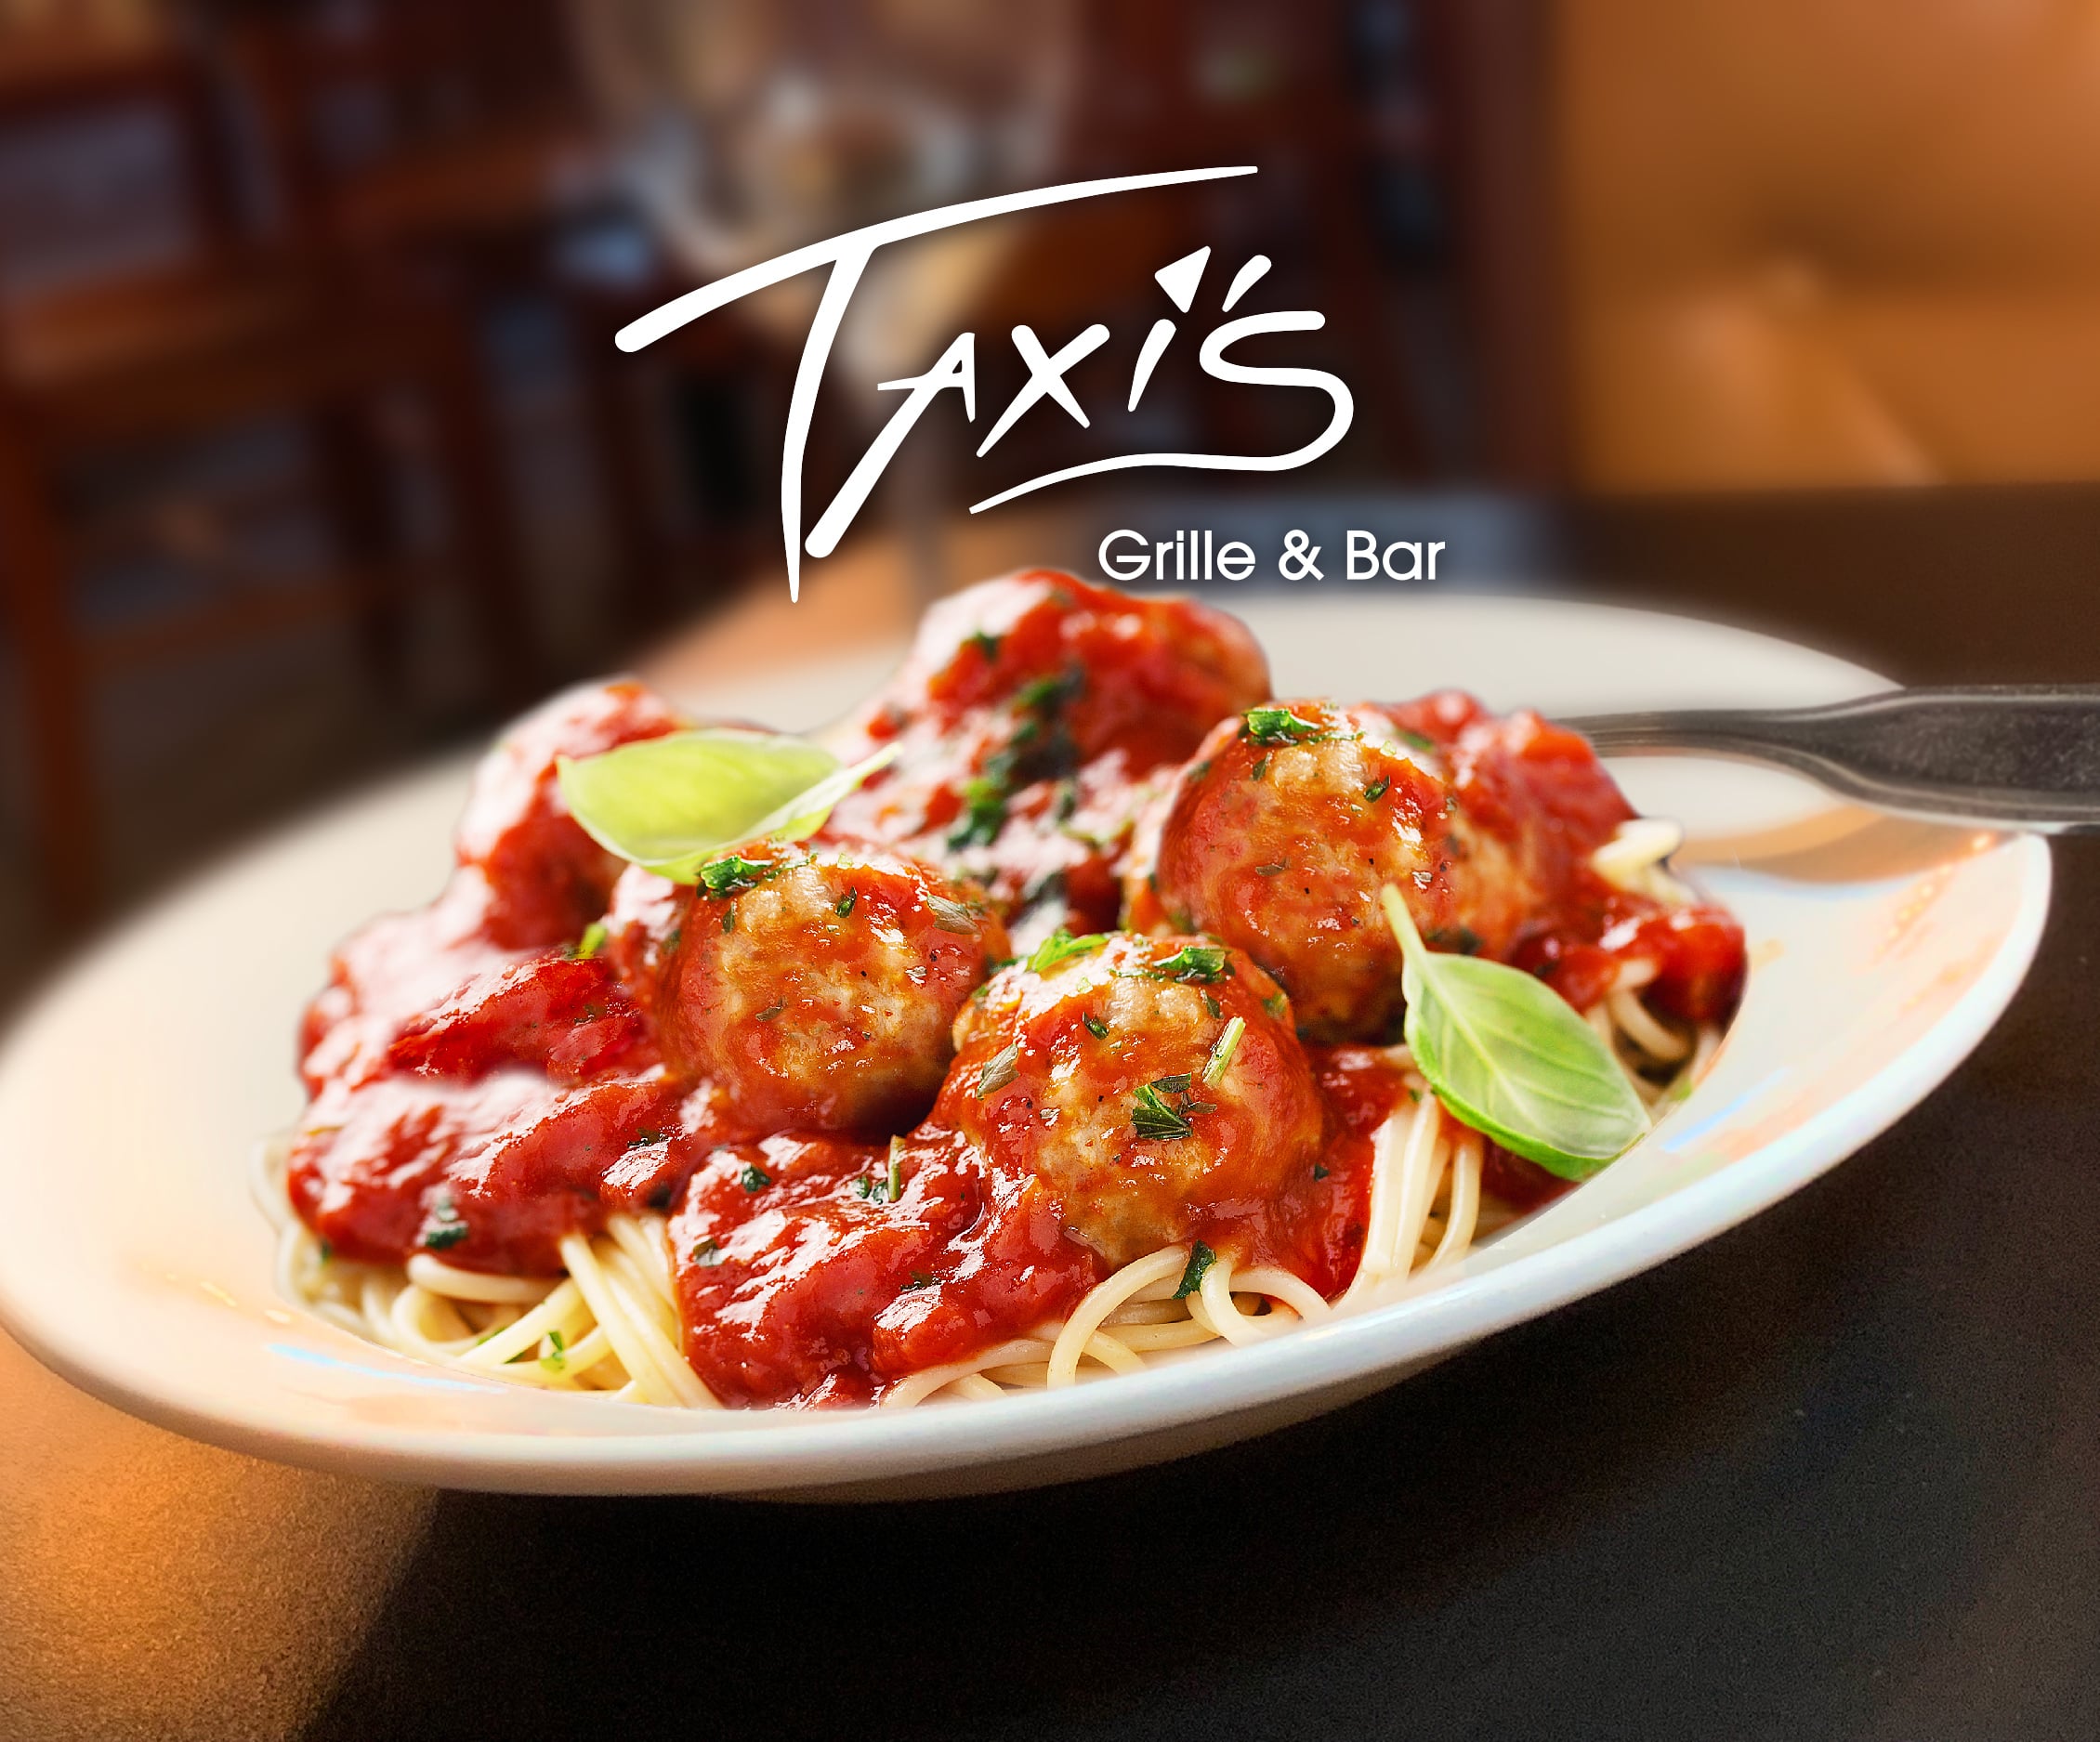 Book table and online reservation at Taxi's Grille & Bar, West Omaha, Omaha